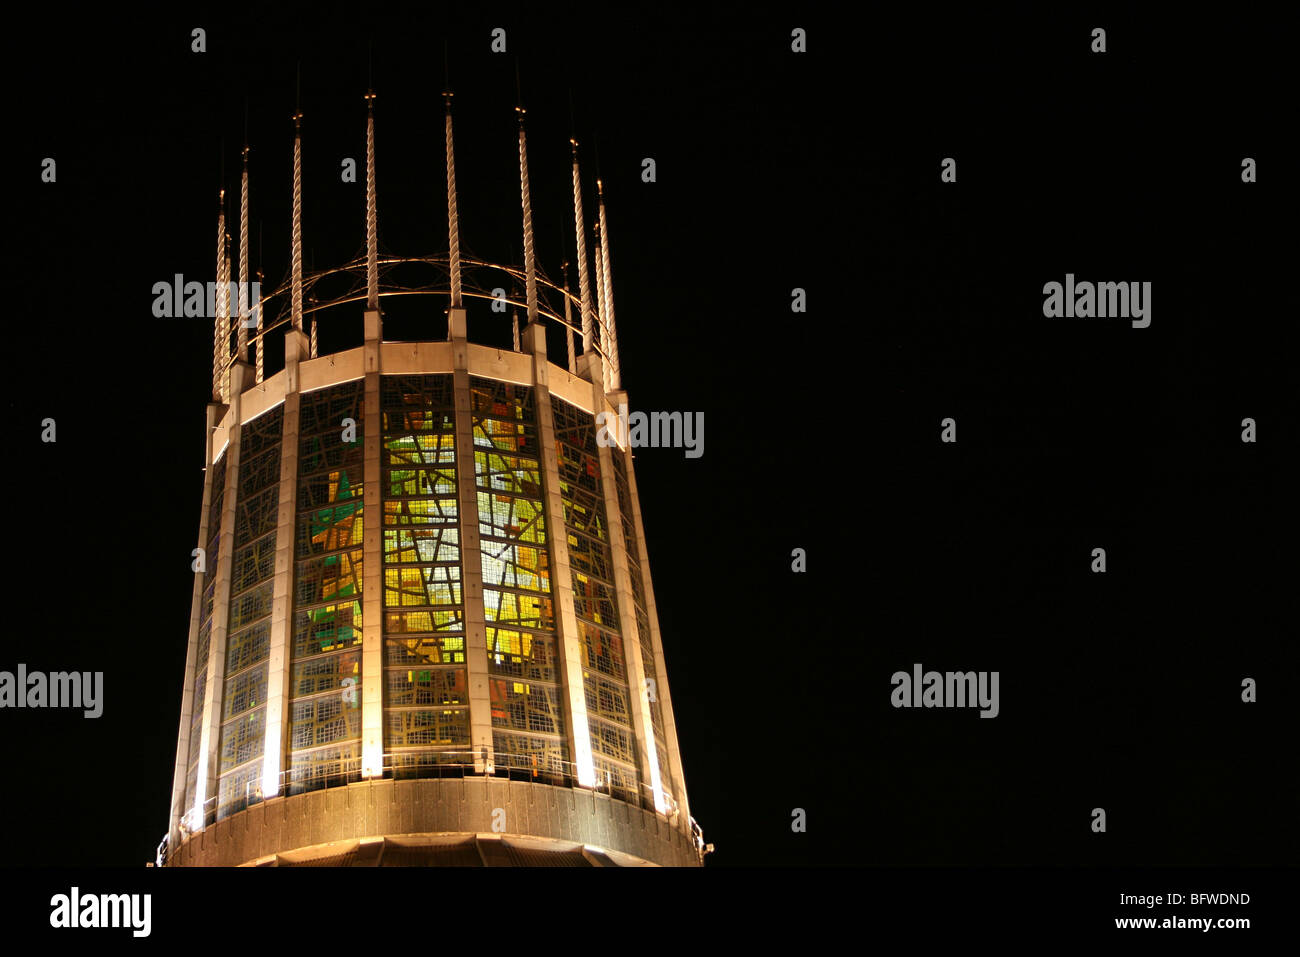 Die Laterne Tower Of Liverpool Metropolitan Cathedral of Christ the King bei Nacht Merseyside, UK Stockfoto